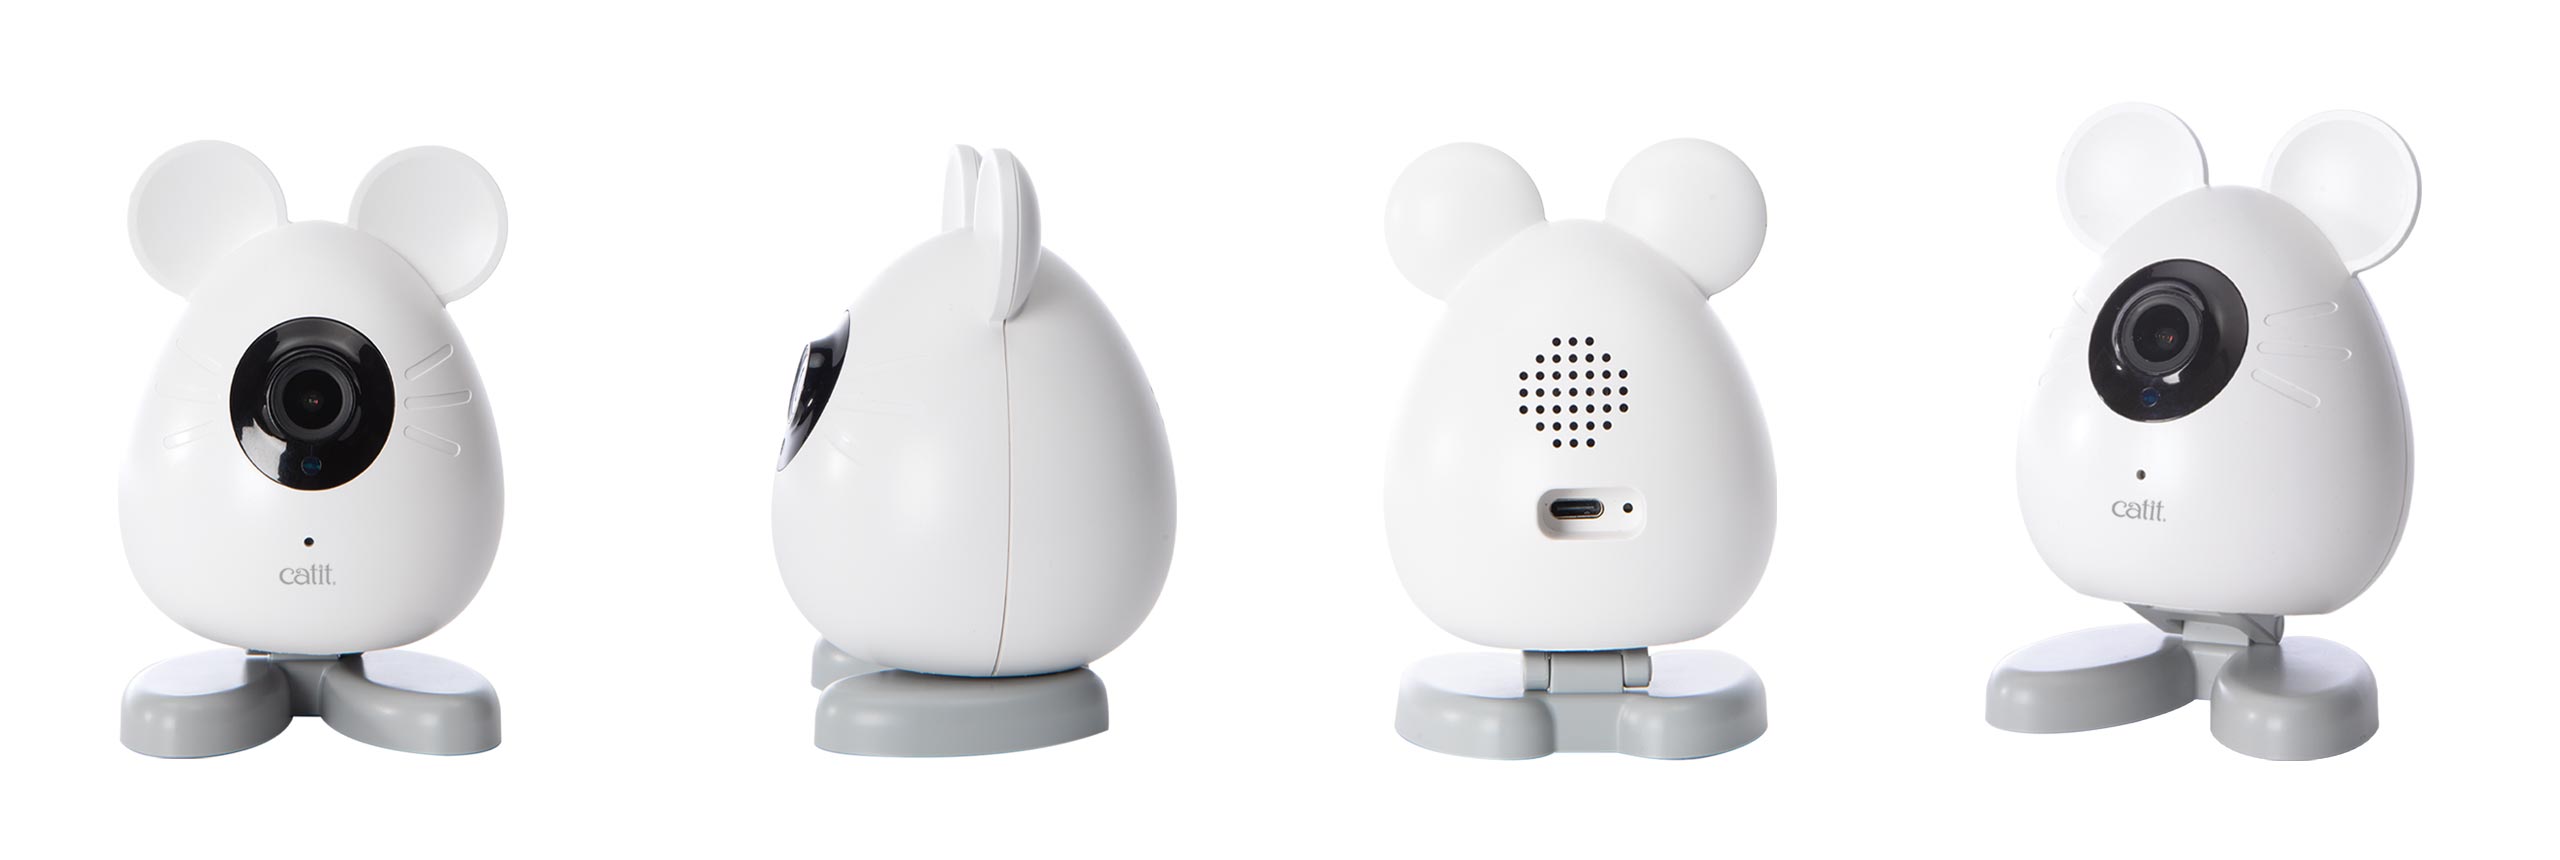 PIXI Smart mouse camera different views